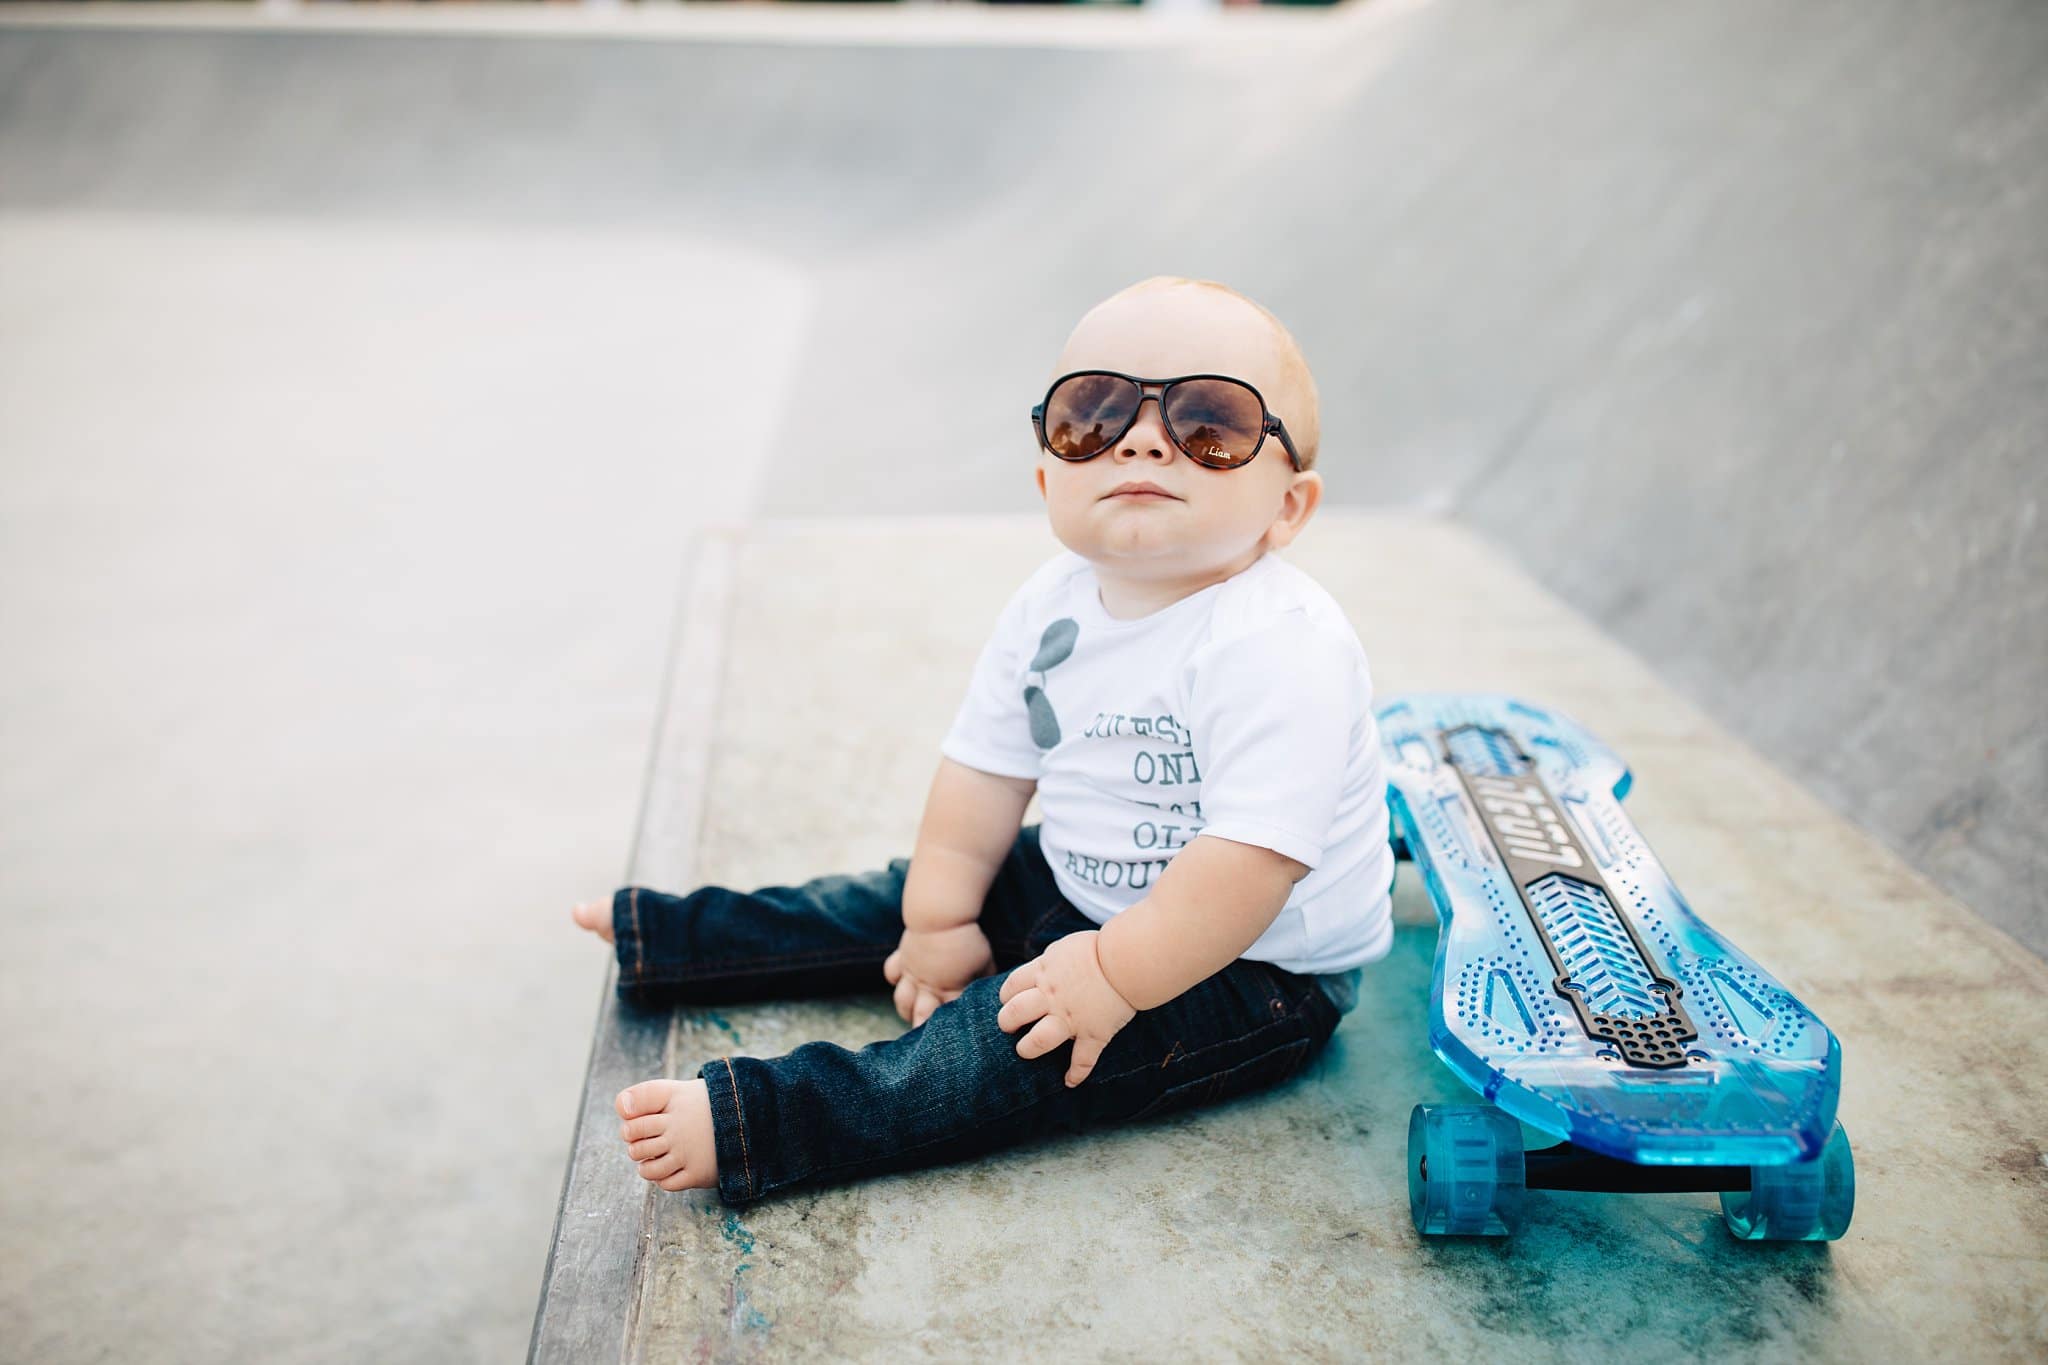 One Year Photos in Jacksonville toddler baby with skateboard ray bans at skate park sunshine park 